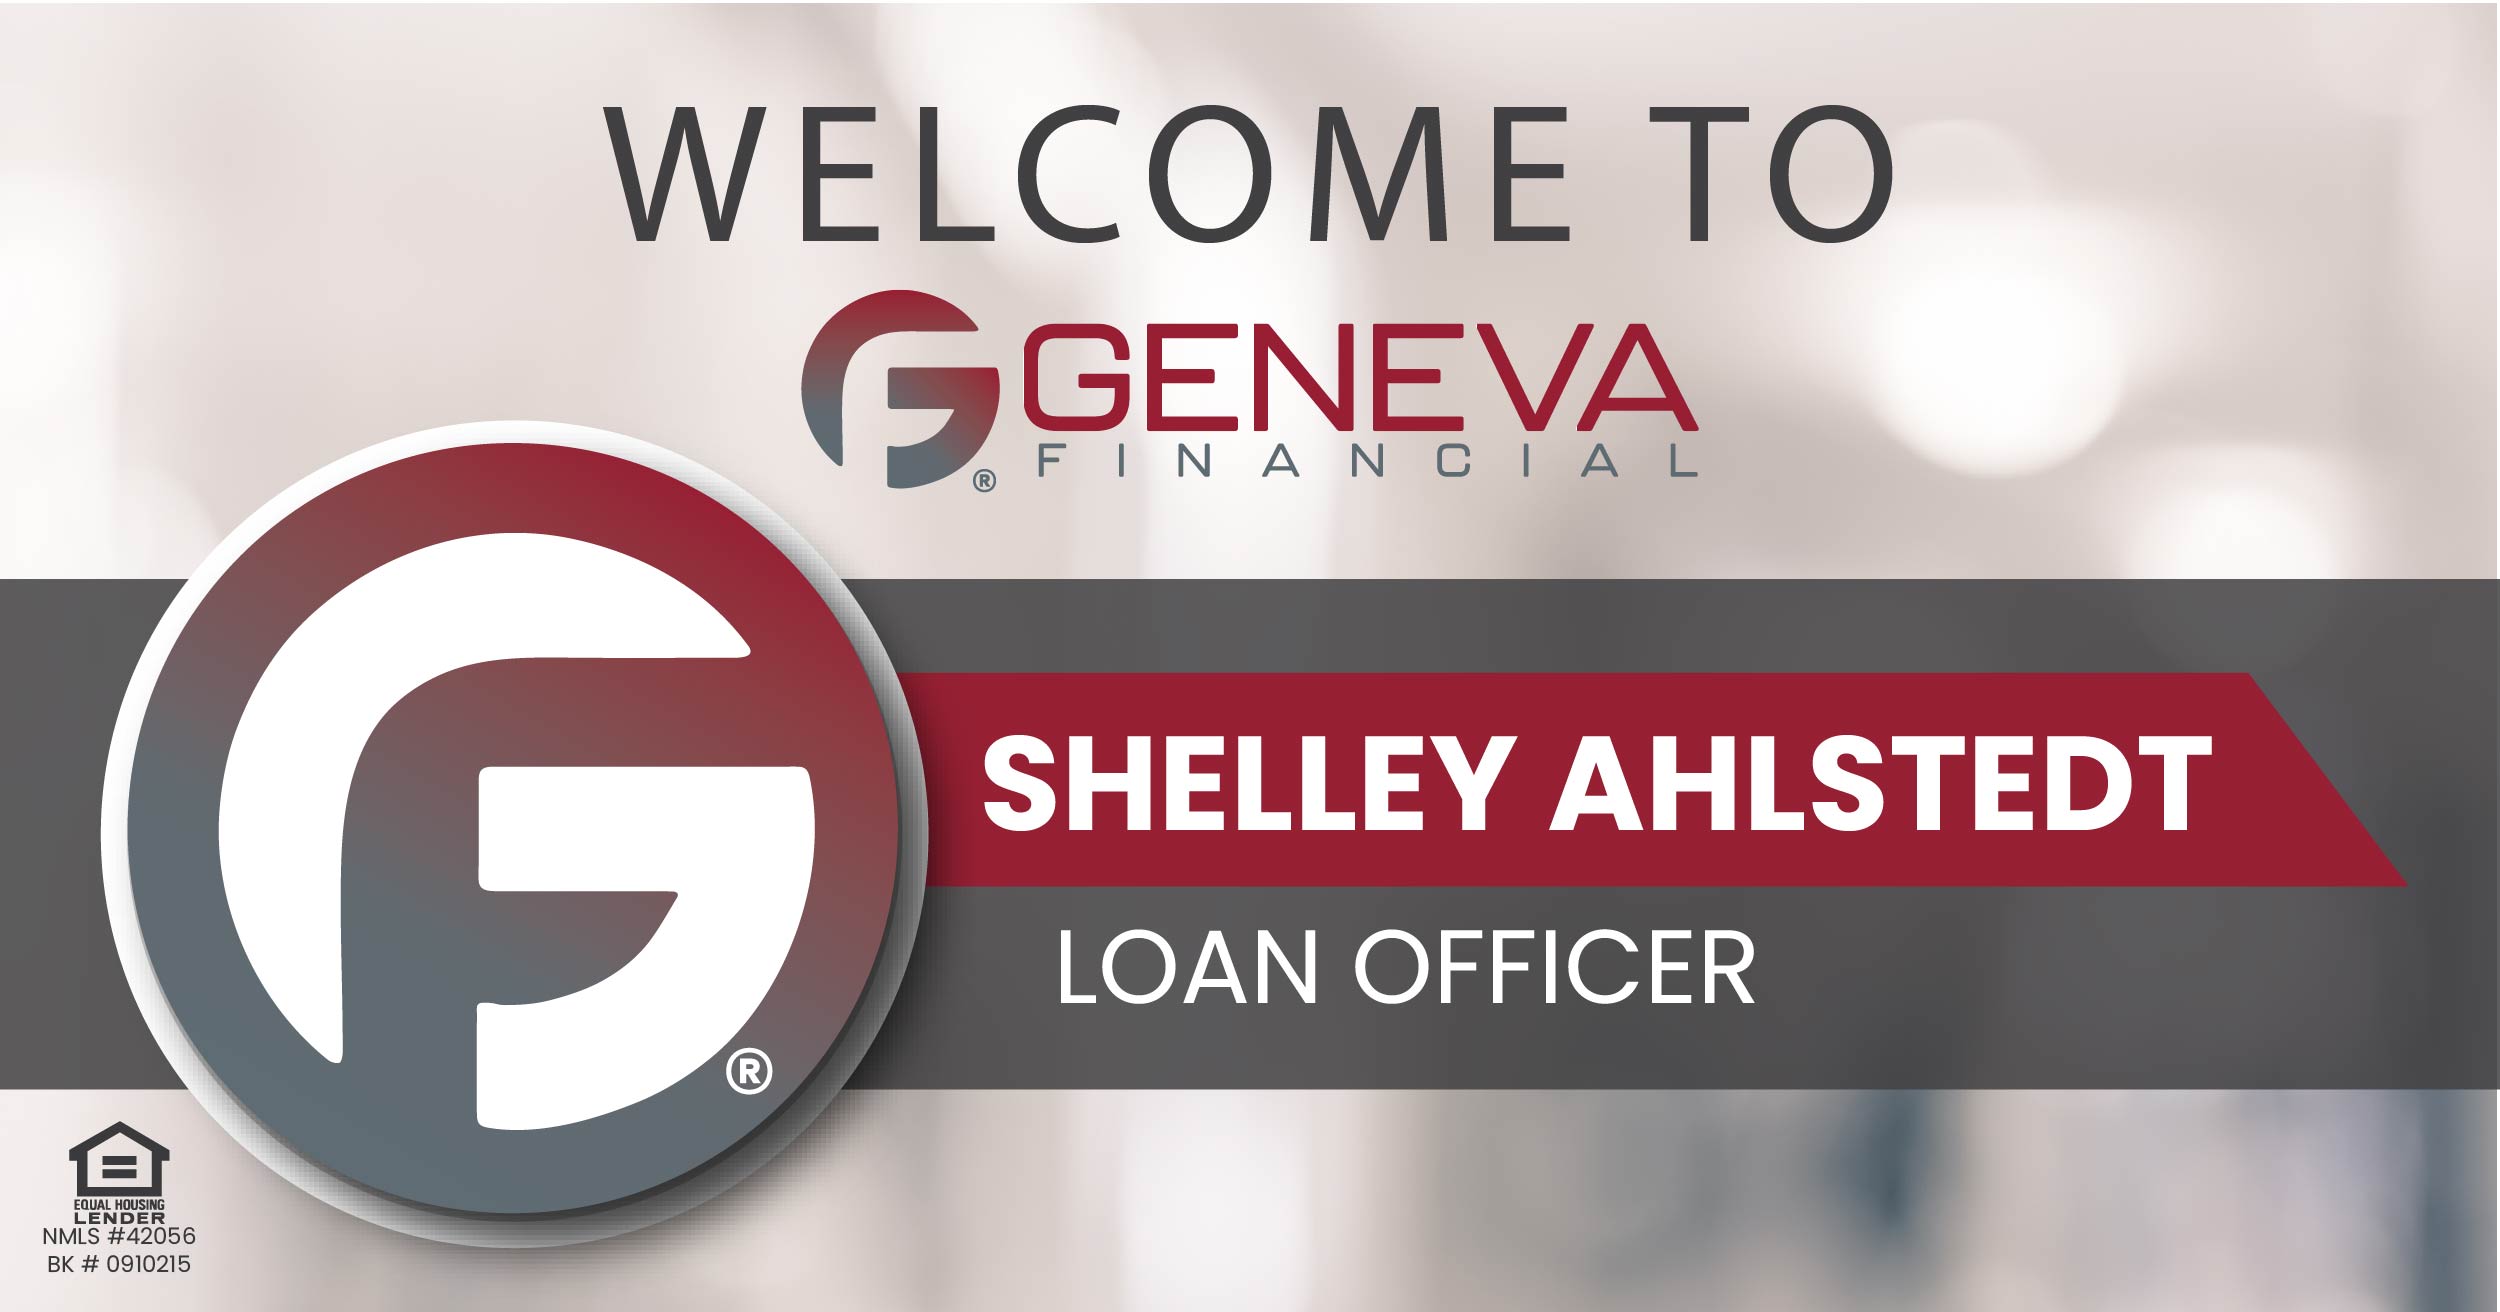 Geneva Financial Home Loans Welcomes New Loan Officer Shelley Ahlstedt to Texas Market – Home Loans Powered by Humans®.